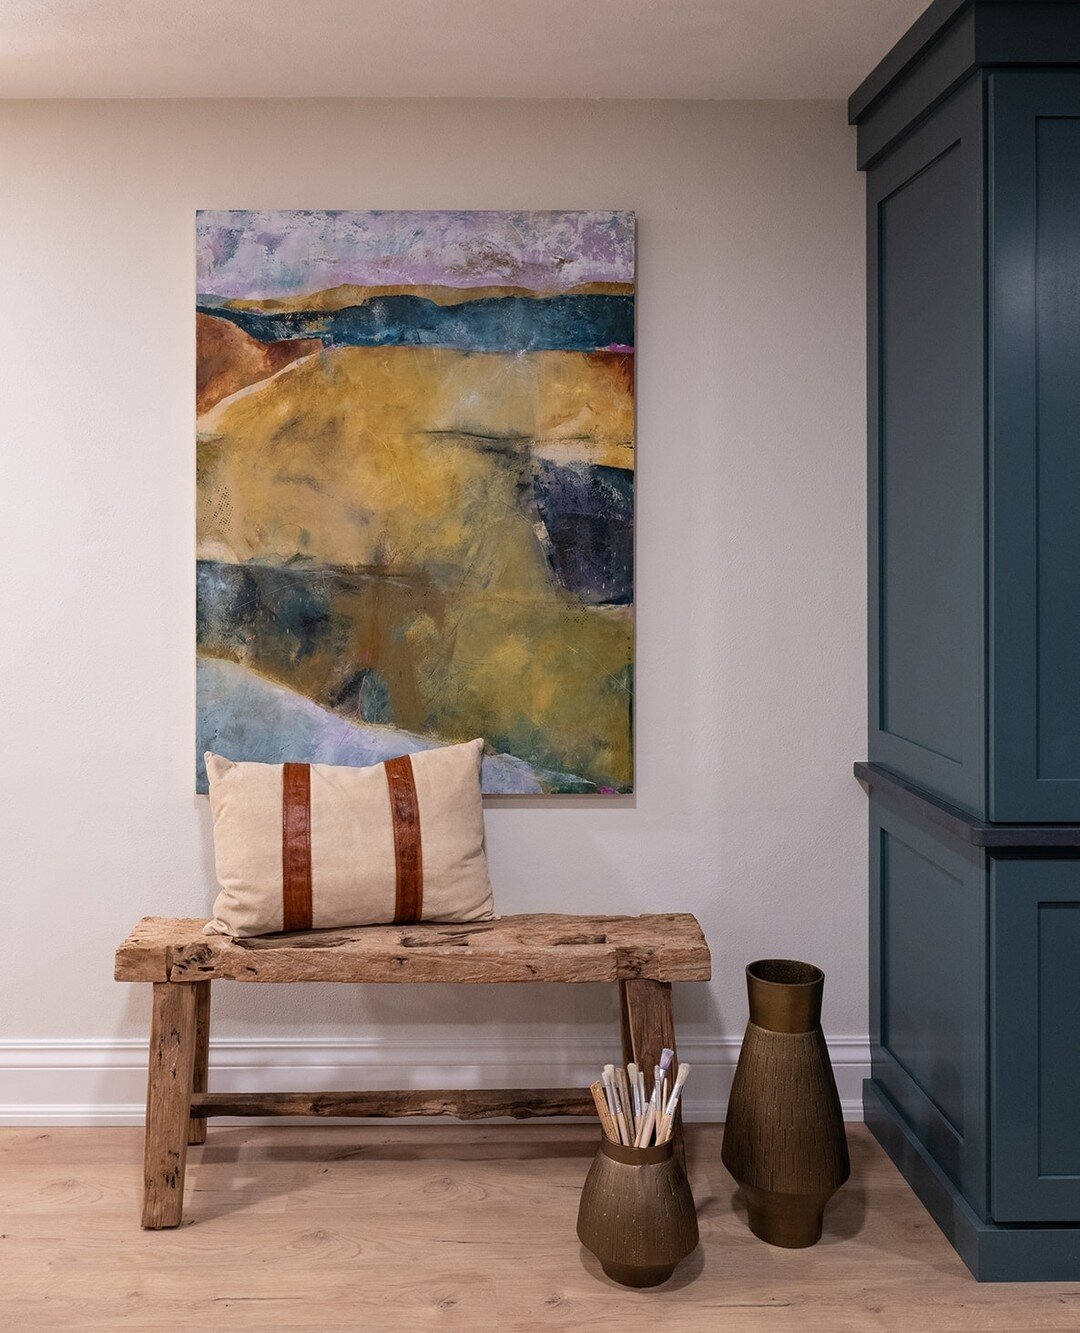 How do you make the corners of your home reflect your story? ⁠🎨 ⁠
⁠
⁠
📸 by: @jmgilephotography⁠
🖼️ by: @karenhertzsumnicht⁠
⁠
⁠
⁠
⁠
#intuitivehomedesign #interiordesign #interiorstyling #antiquedecor #homedecor #homestyling #interiordesigner #wisc